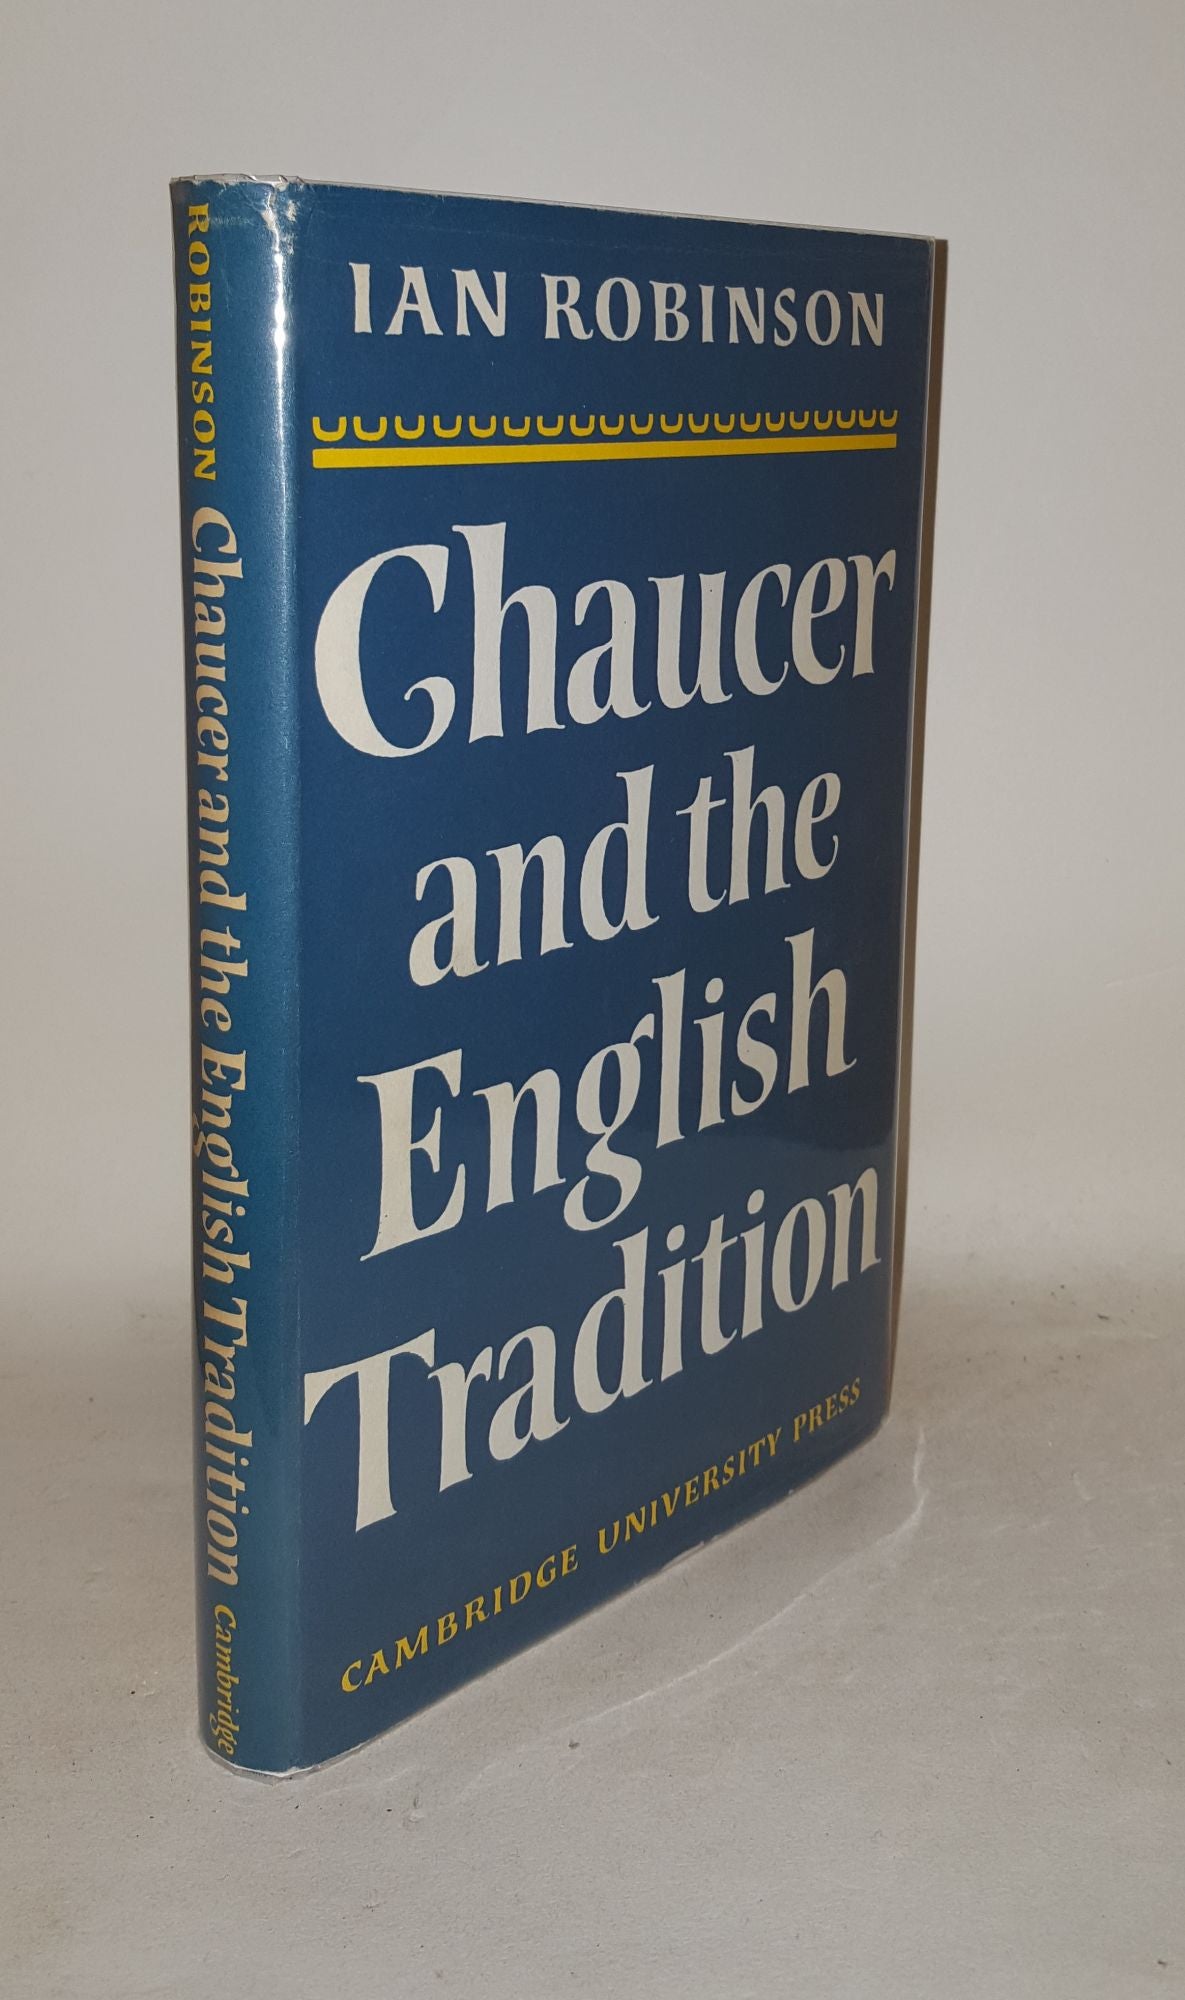 ROBINSON Ian - Chaucer and the English Tradition